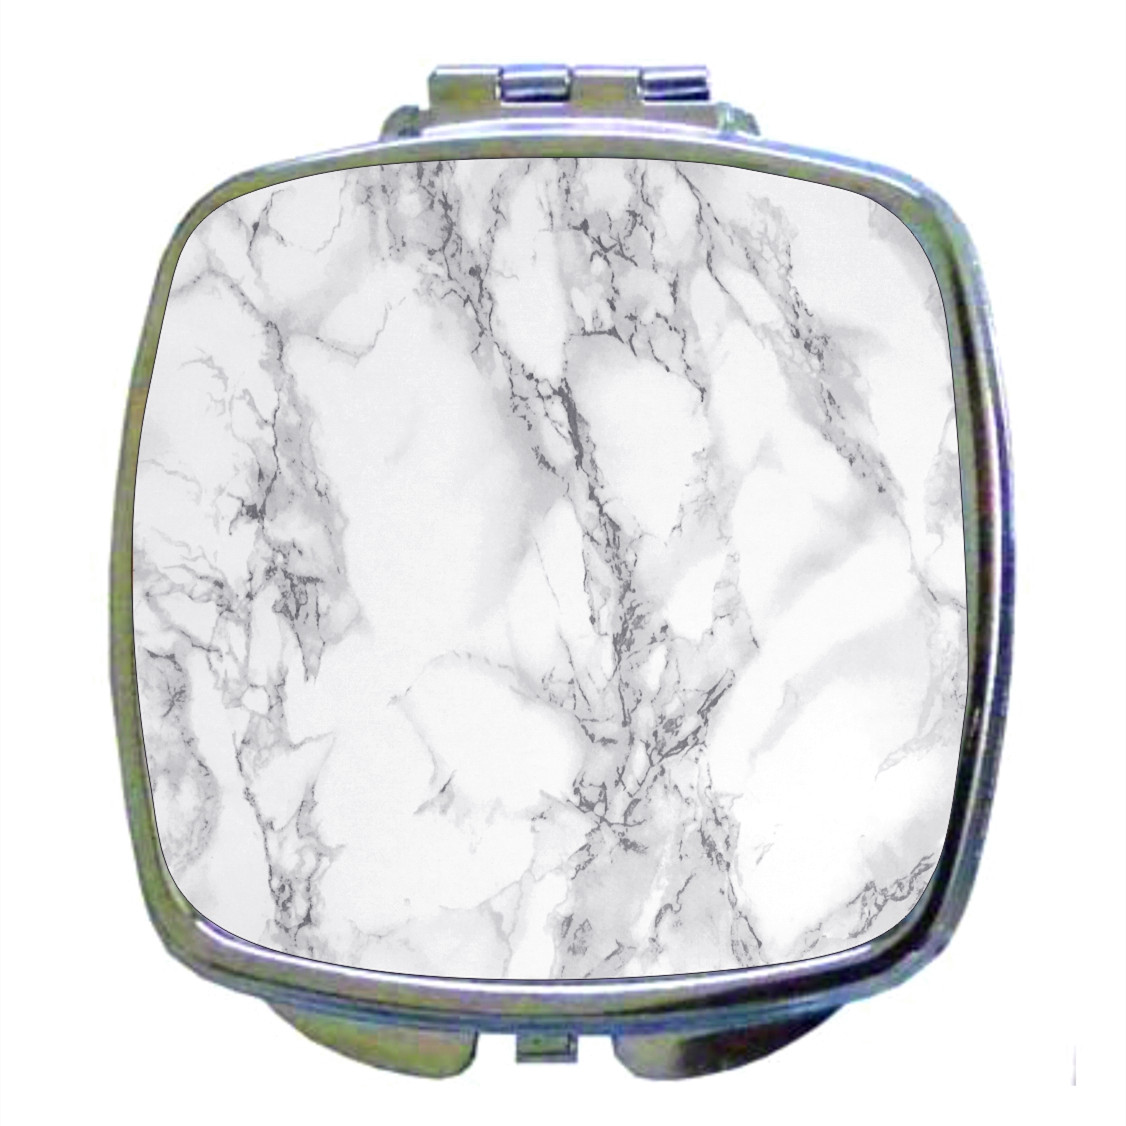 marble printed compact mirror Mother's Day gift in hand luggage